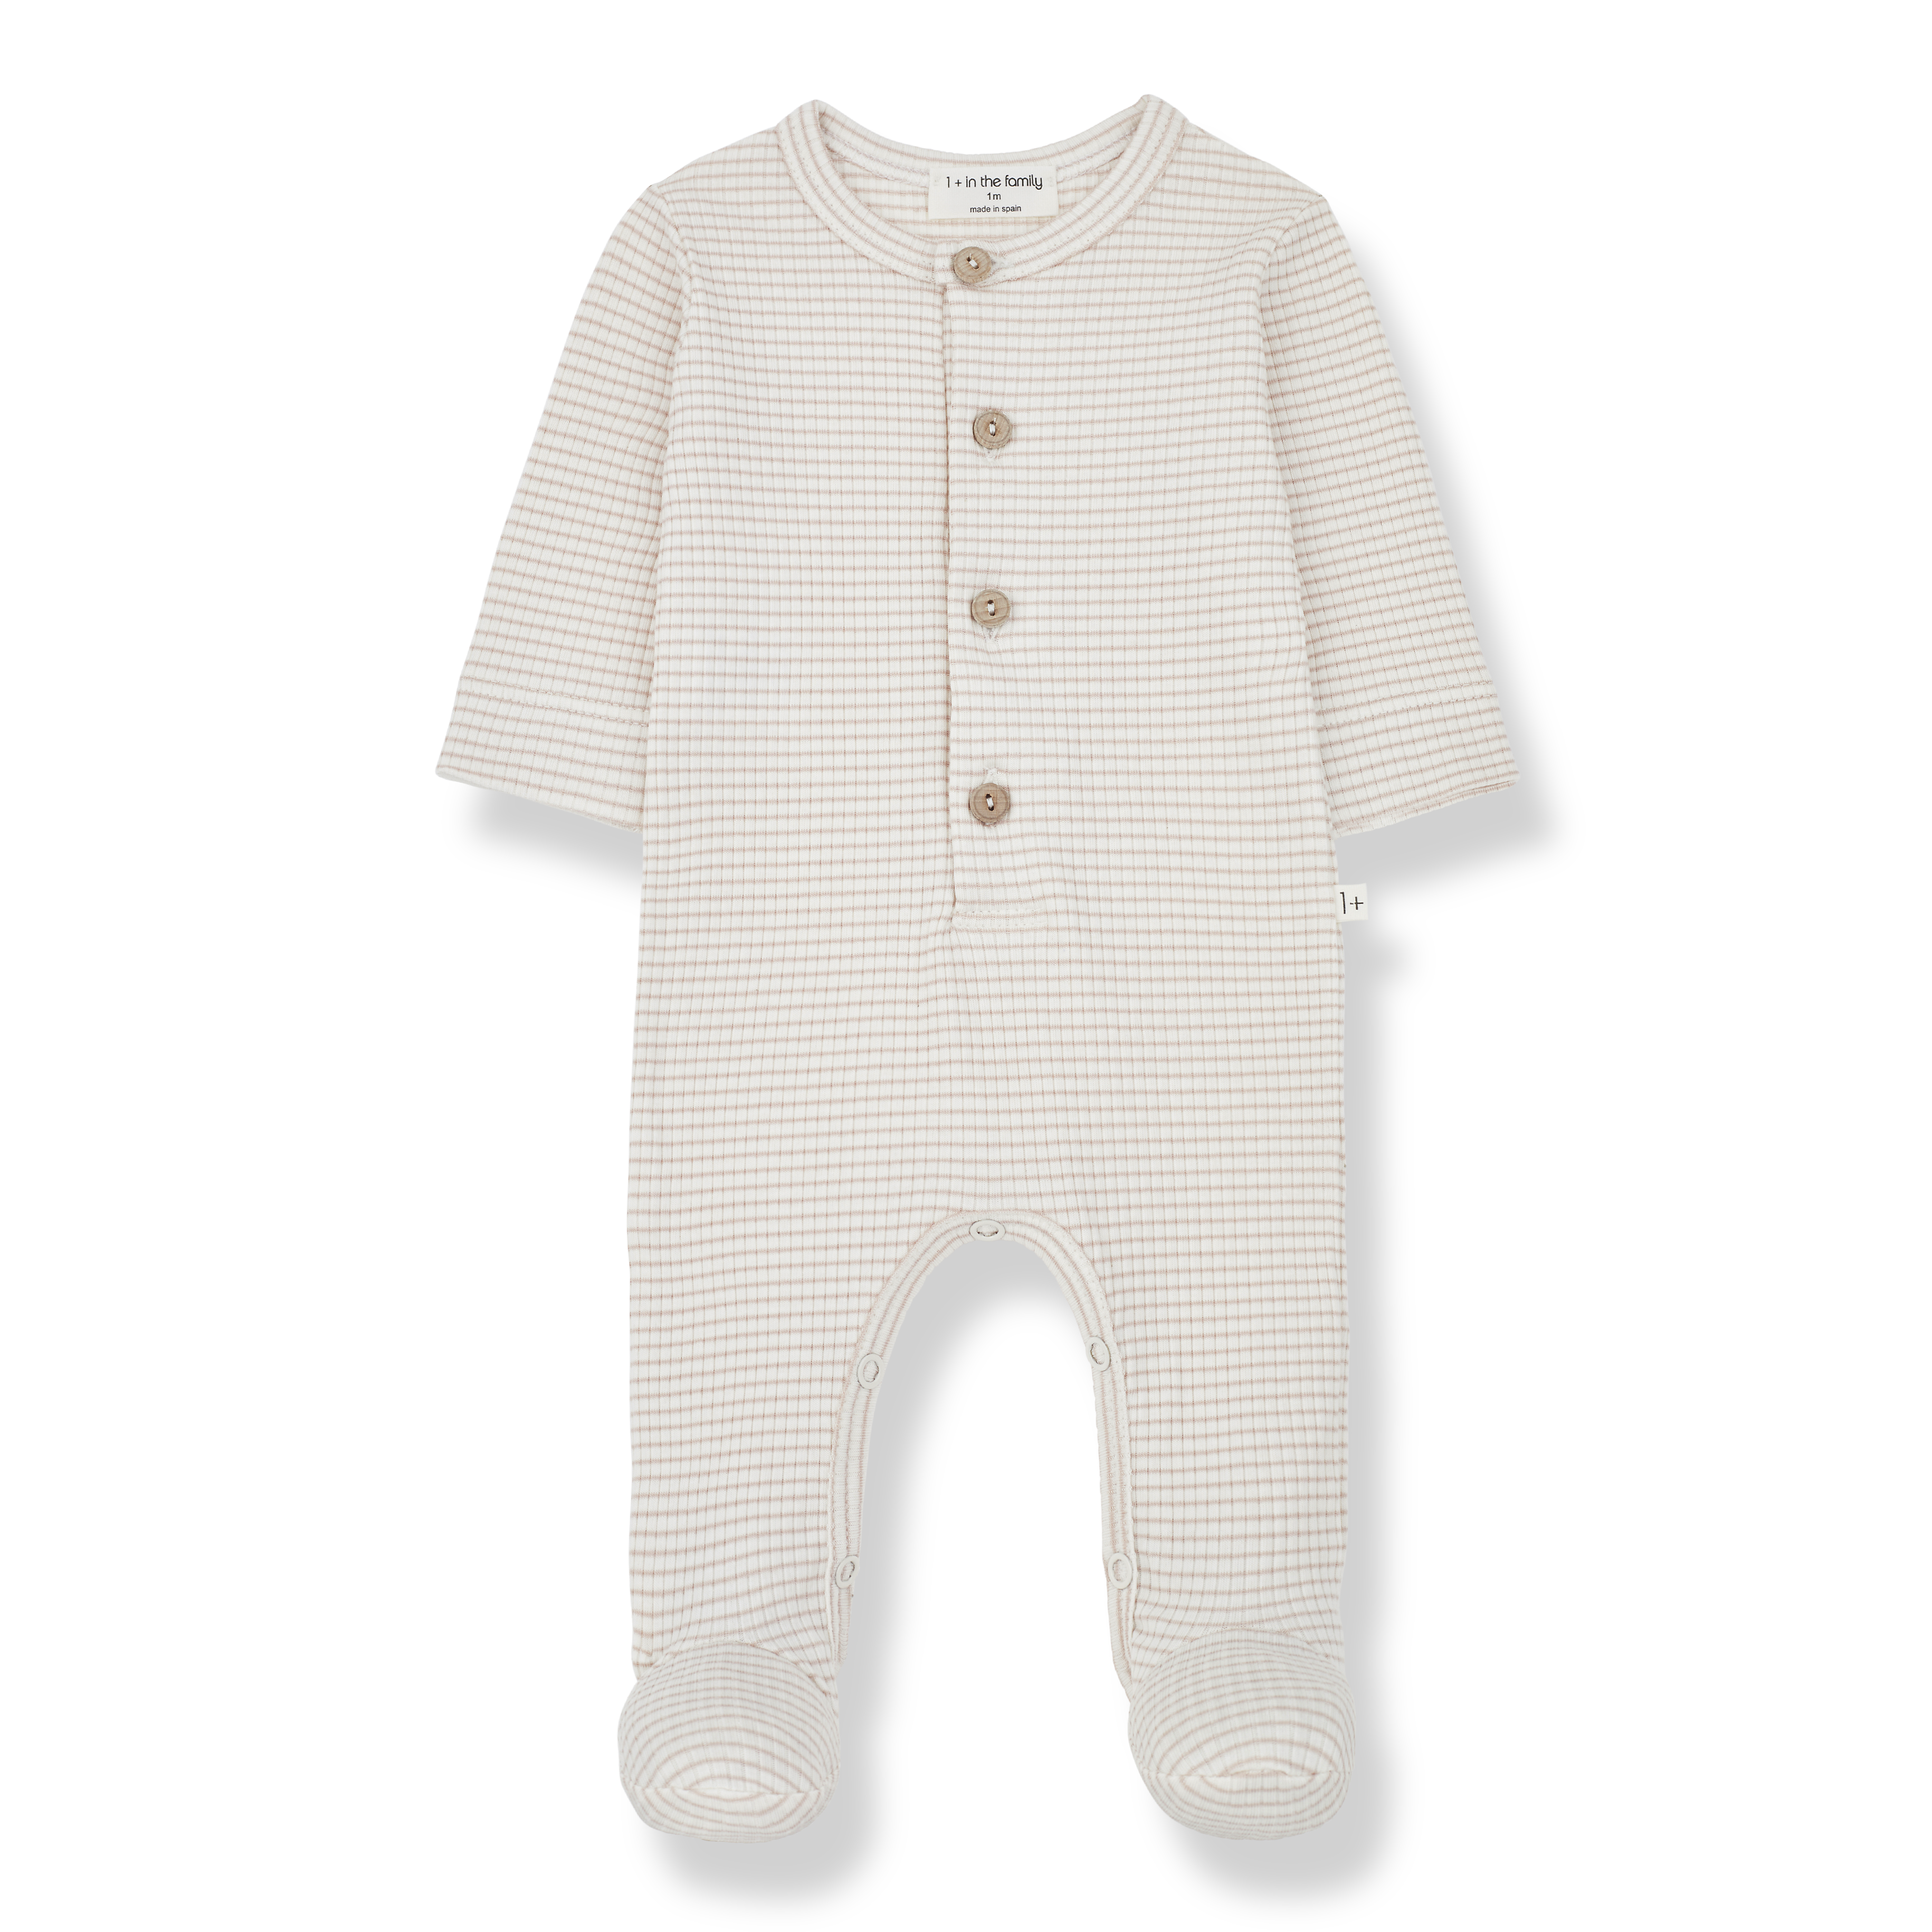 1+ in the family - nino - jumpsuit with feet - nude/ivory